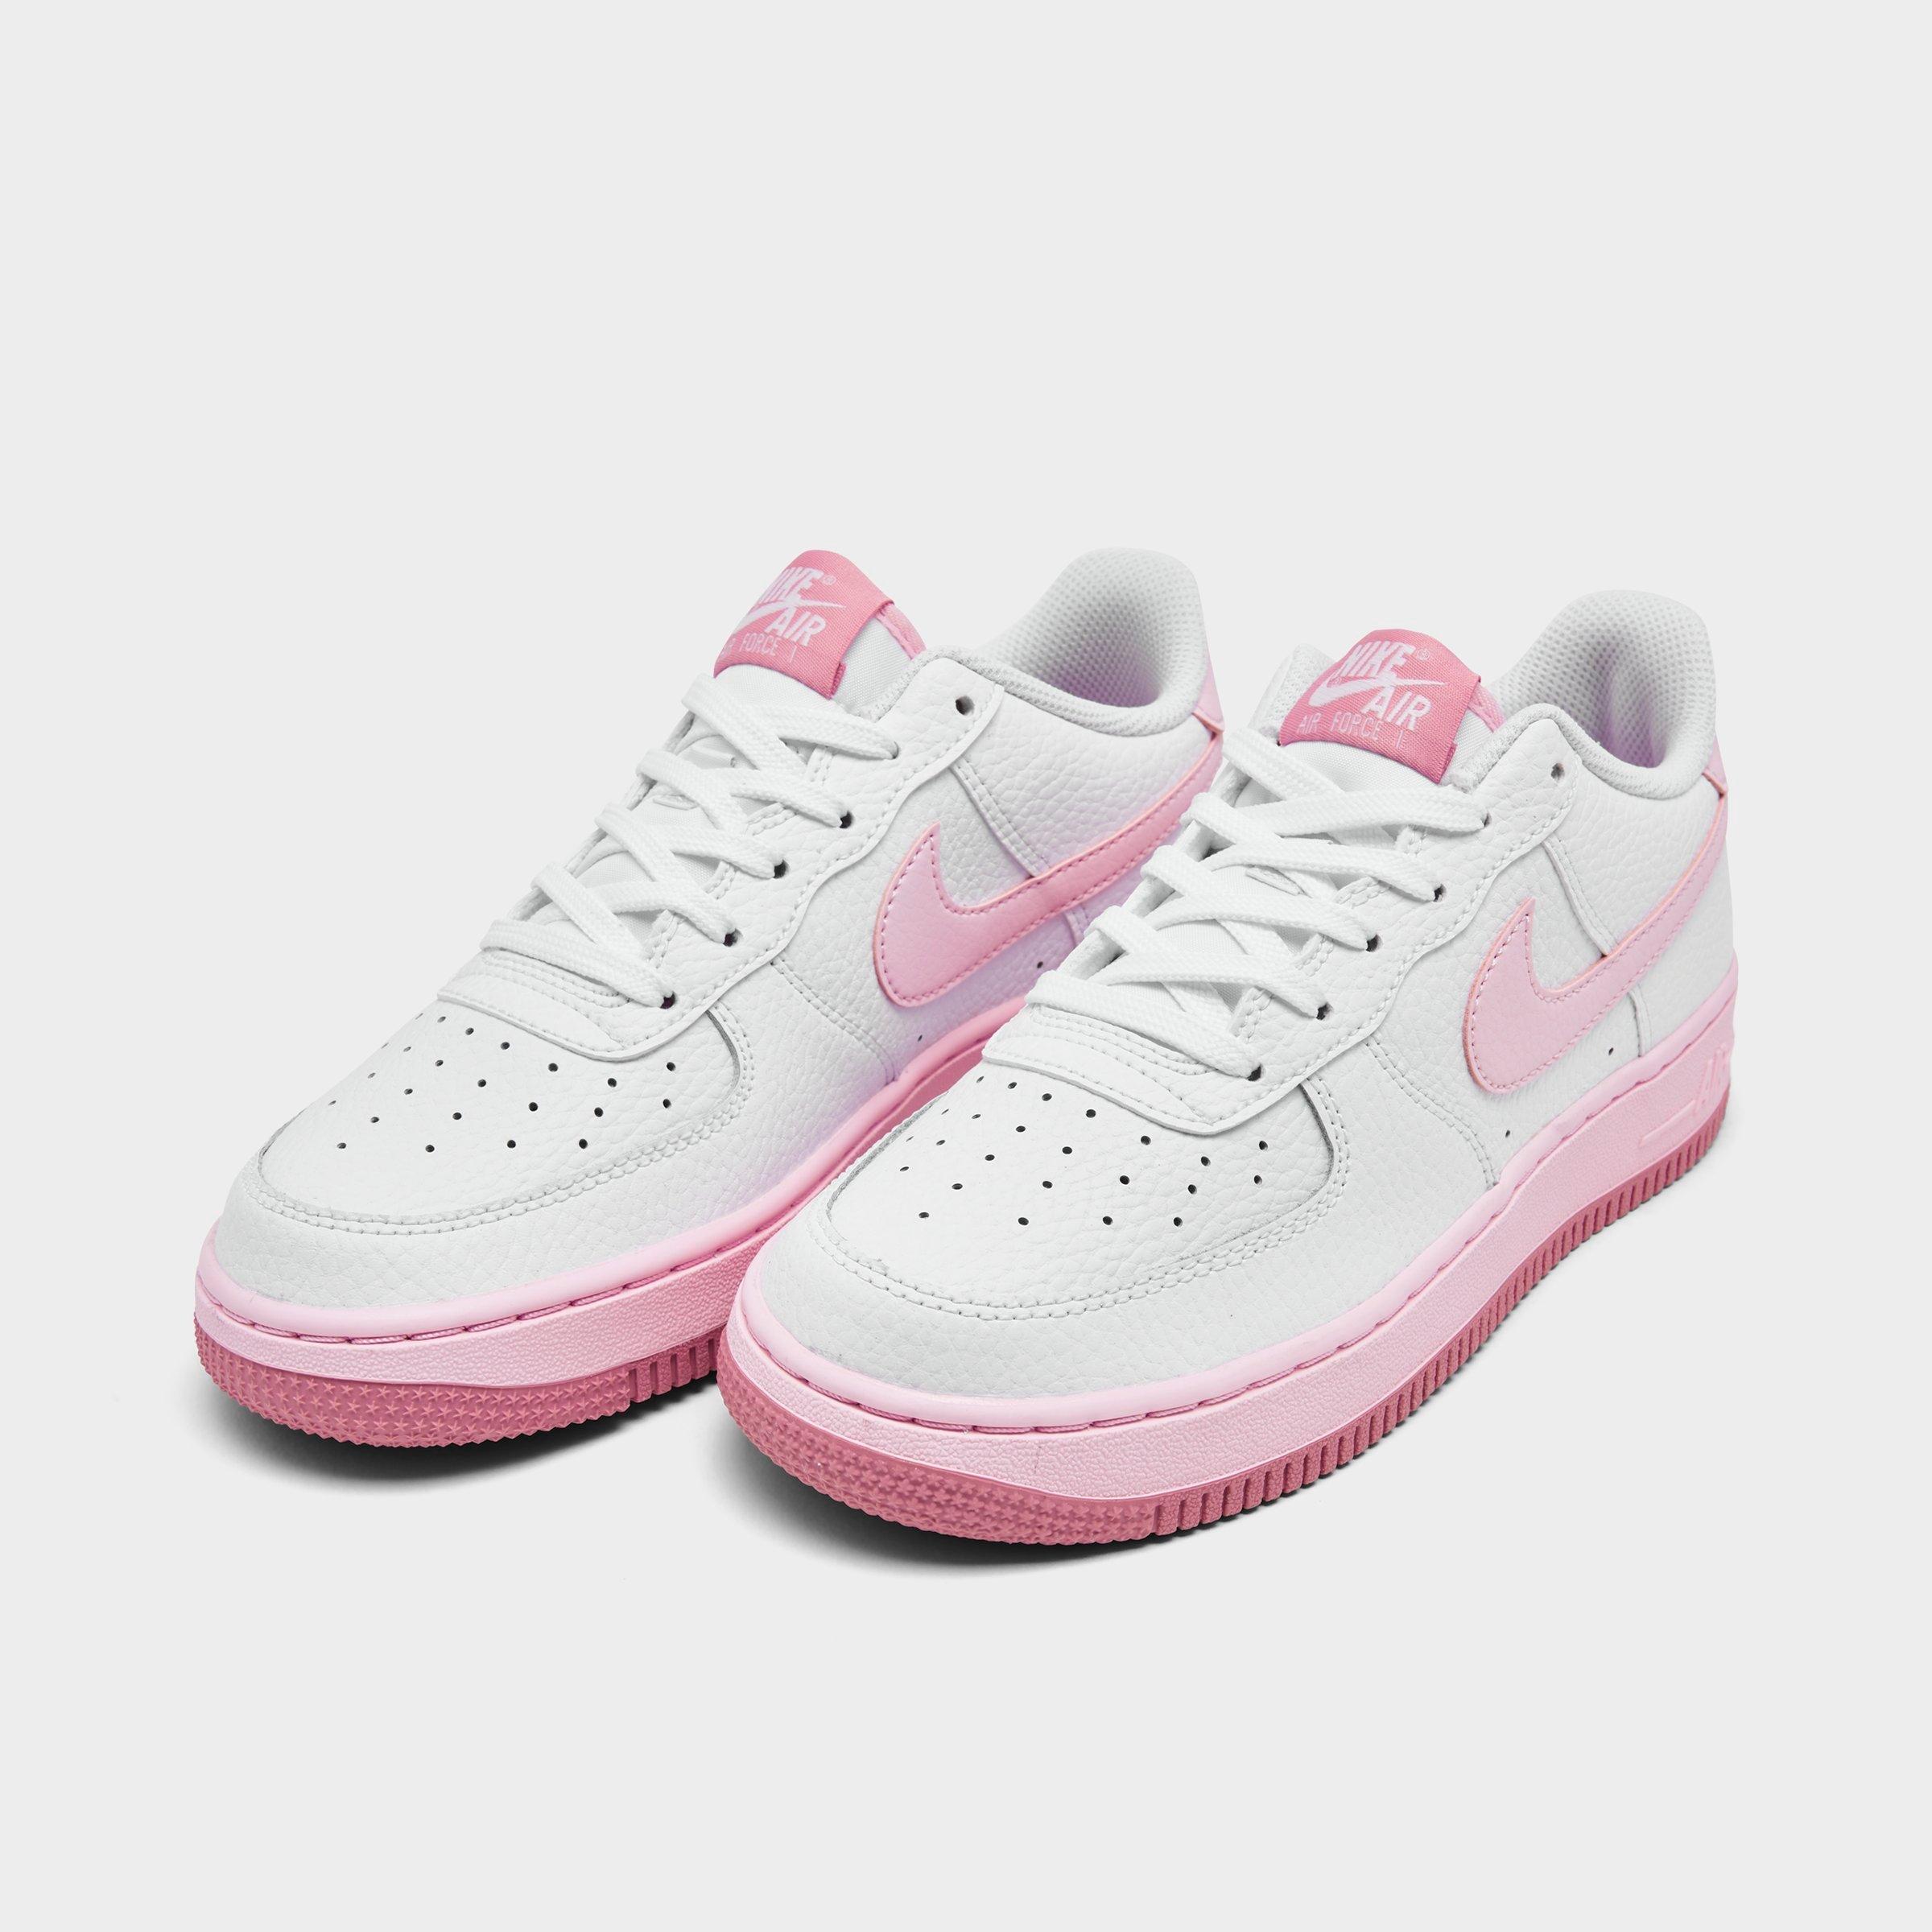 pink and white air force 1 low